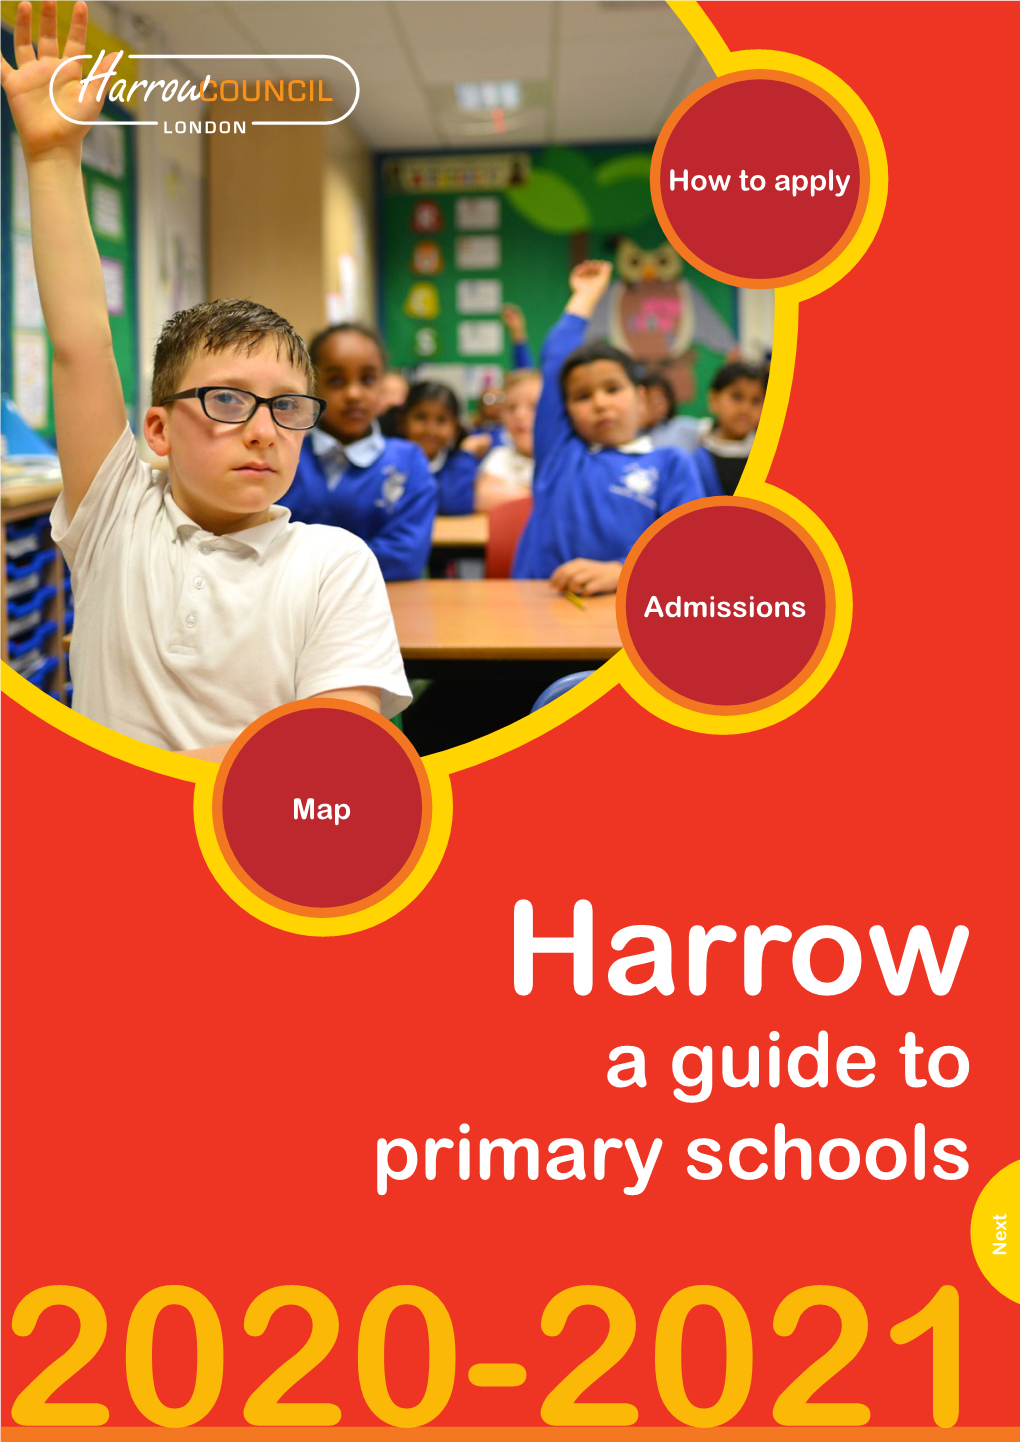 A Guide to Primary Schools 2020-2021 Contents